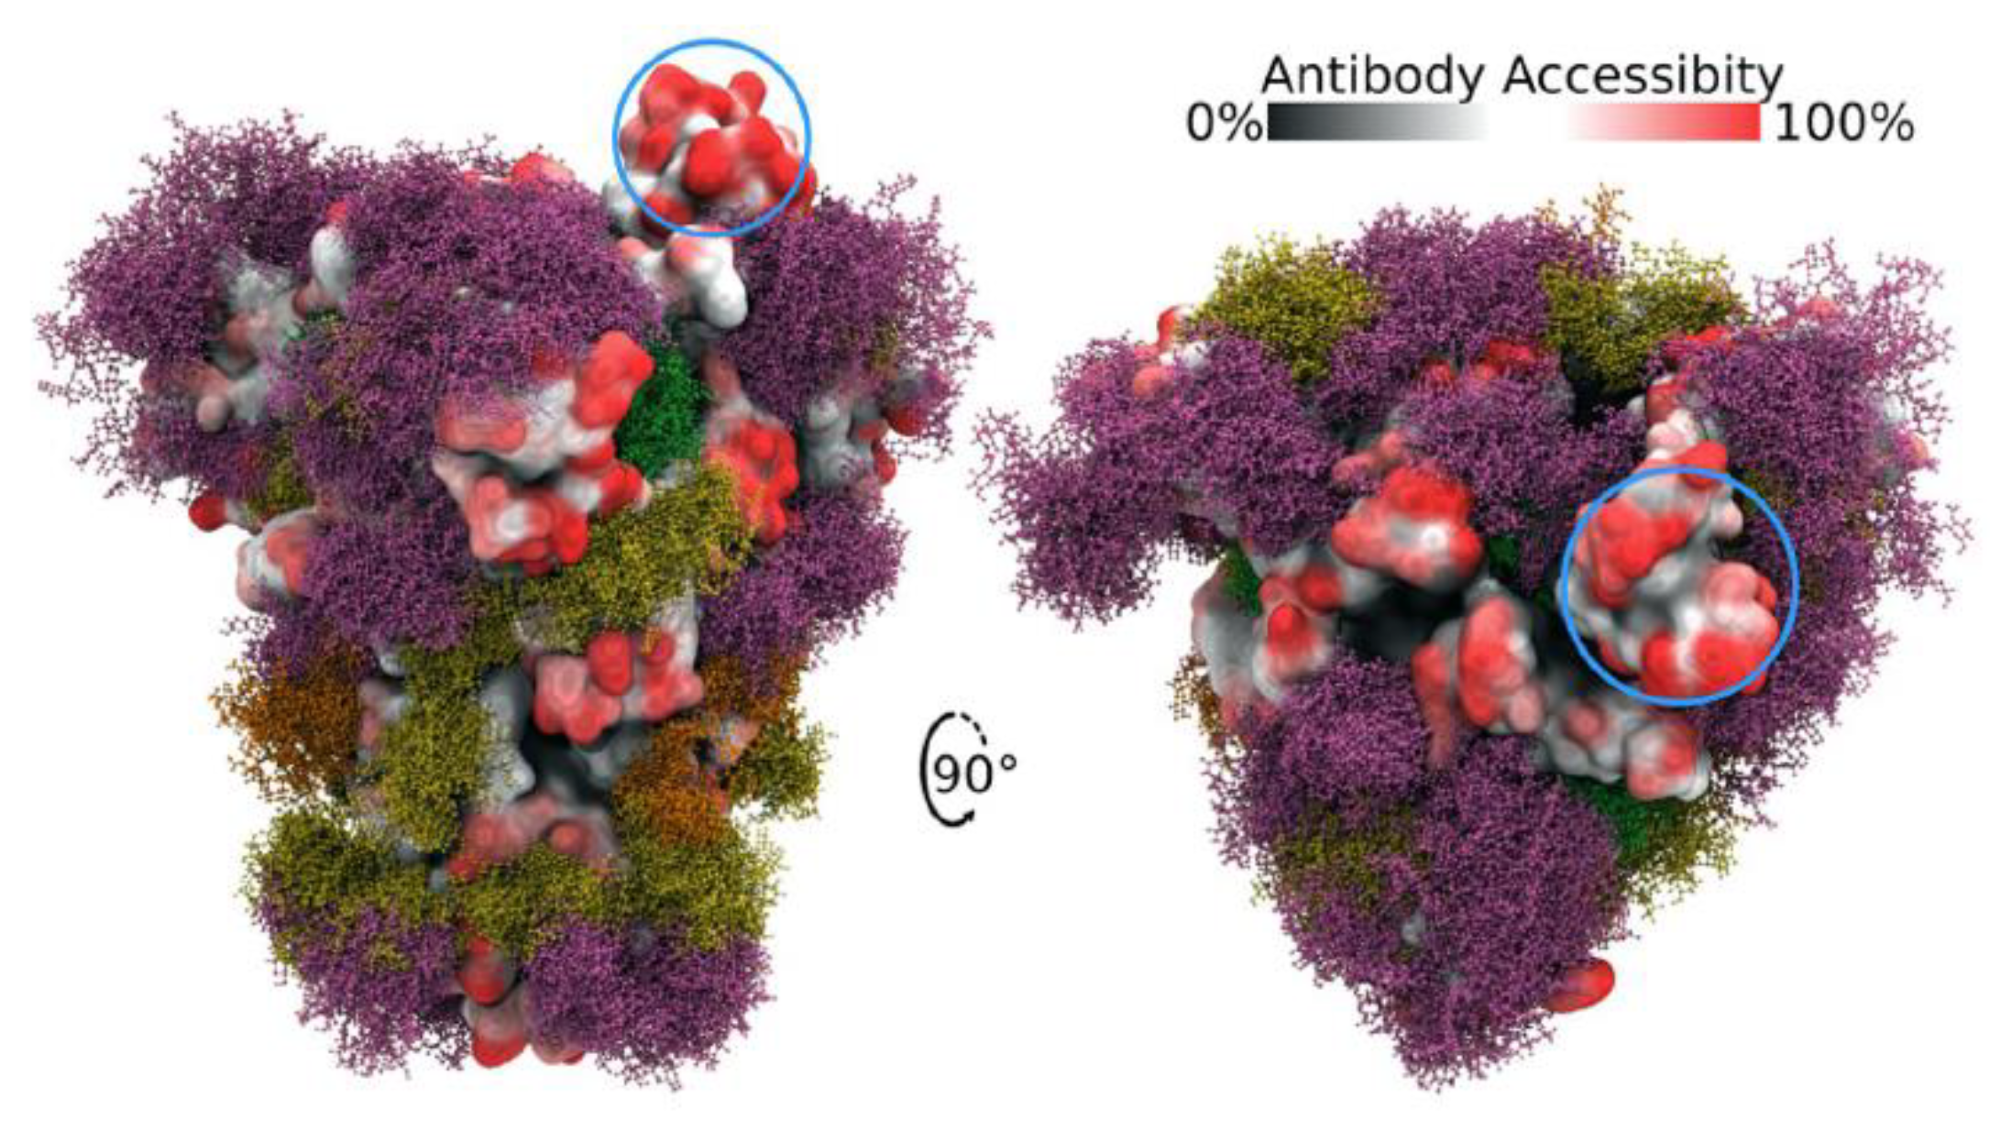 Side and top views of Spike trimer with site-specific glycosylation shown (moss surface) from molecular dynamics simulations [23]. The glycans are shown in ball-and-stick representation in green, dark yellow, orange and pink. The protein surface is colored according to antibody accessibility from black (least) to red (most accessible). One RBD is shown in the open conformation (circled in blue). Images are from [23] and are used under Creative Commons Attribution 4.0 International License: https://creativecommons.org/licenses/by/4.0/, accessed on 1 March 2022.